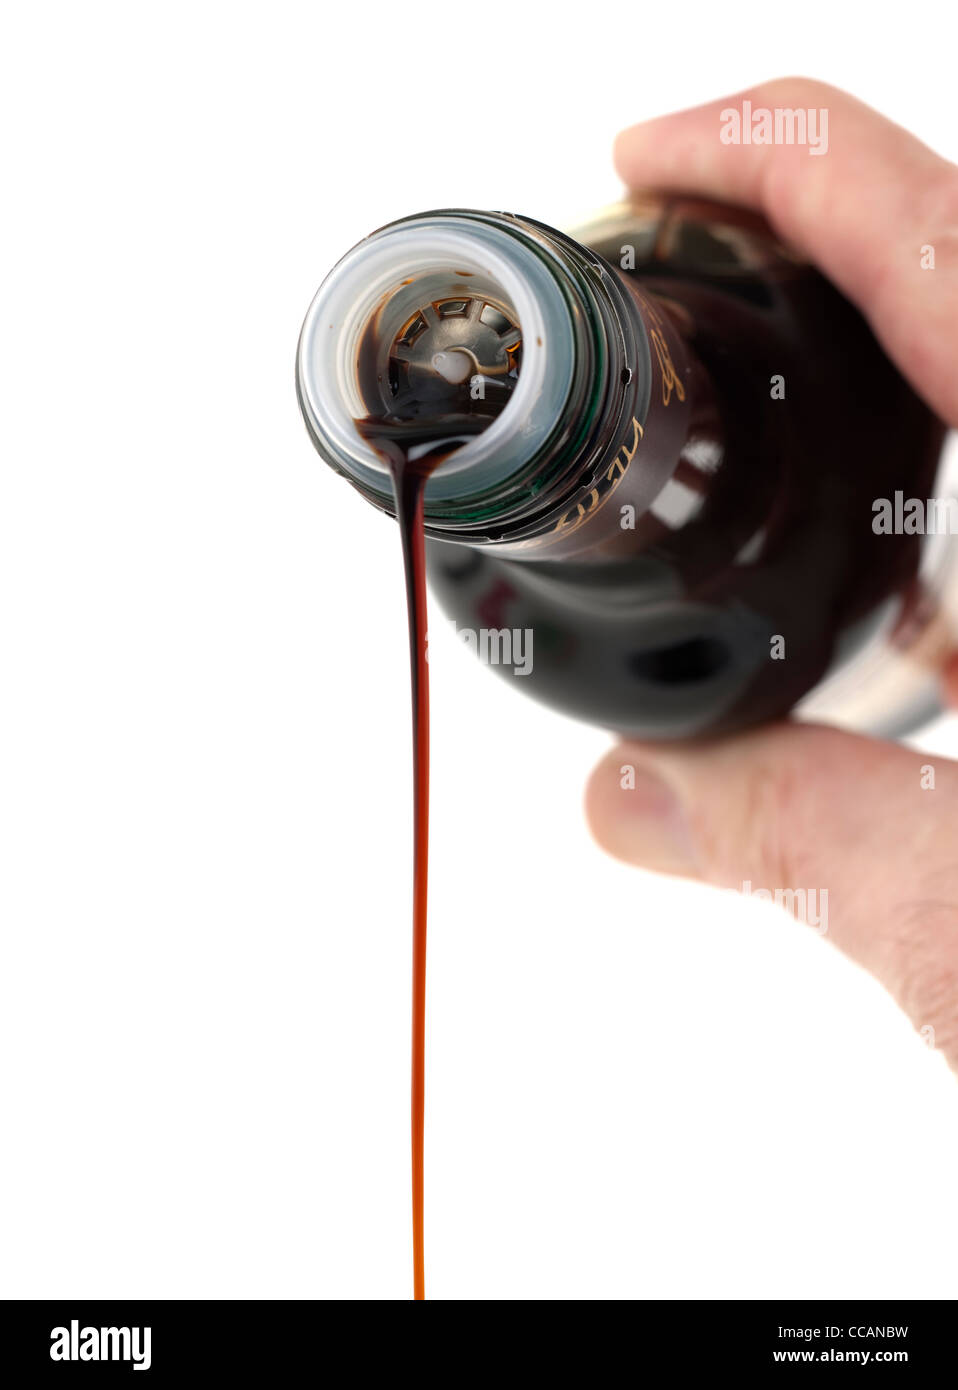 Pouring out a measure of Aceto Balsamico vinegar Stock Photo